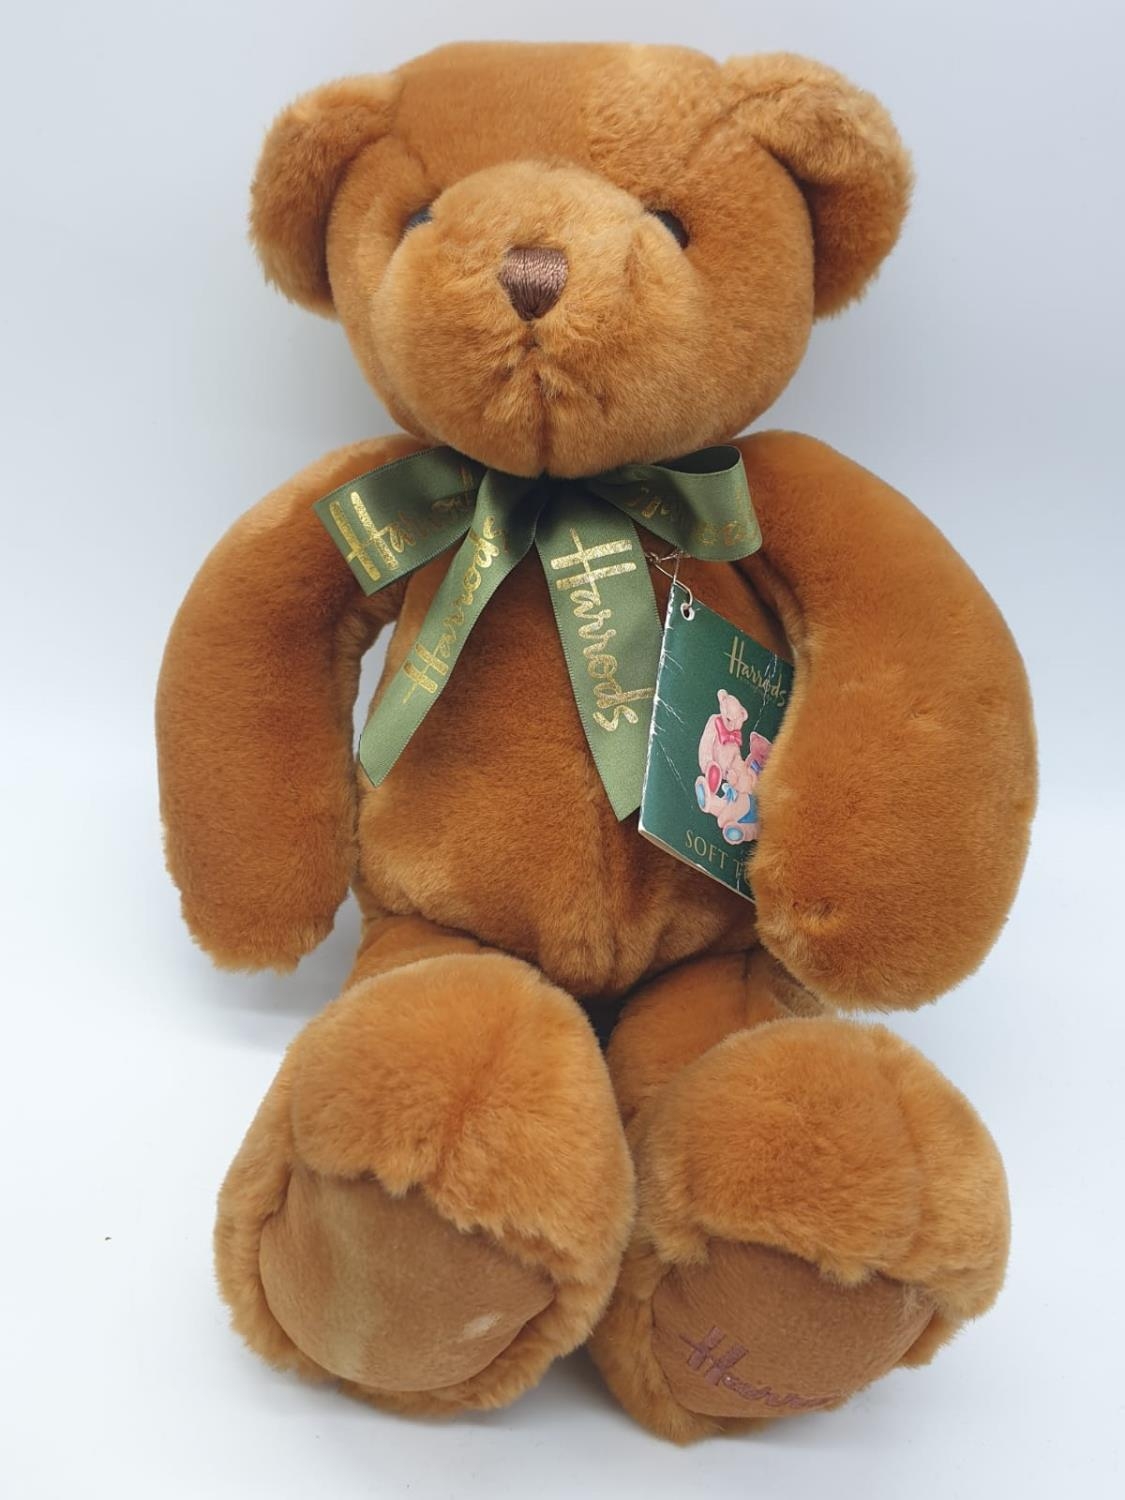 Two Harrods teddy bears, one being "My first Harrods teddy" and a traditional Harrods teddy. Approx. - Image 2 of 10